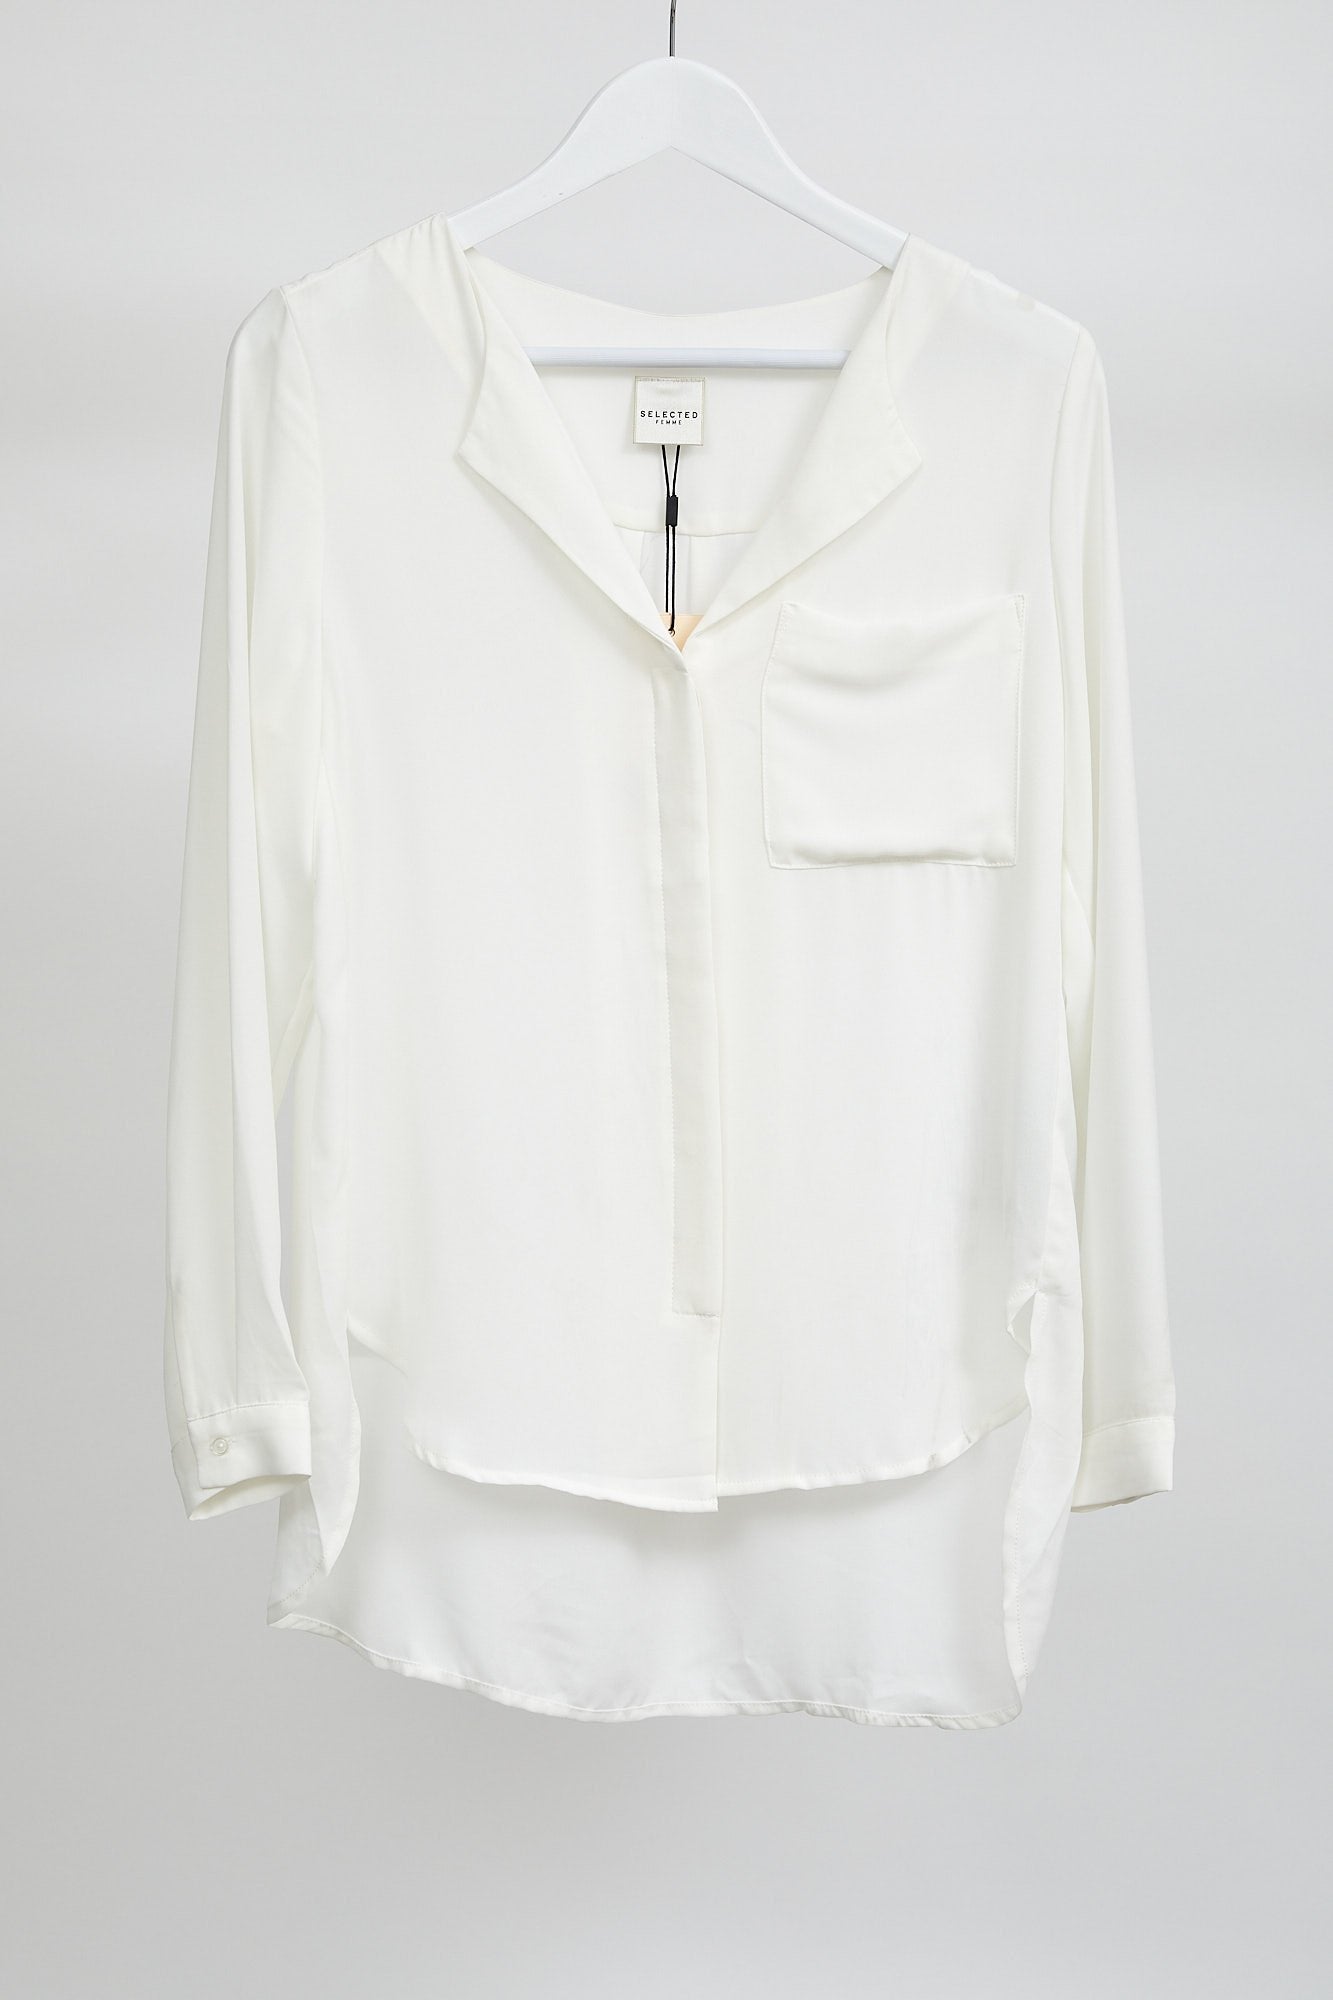 Womens Selected Femme White Blouse: Size Small